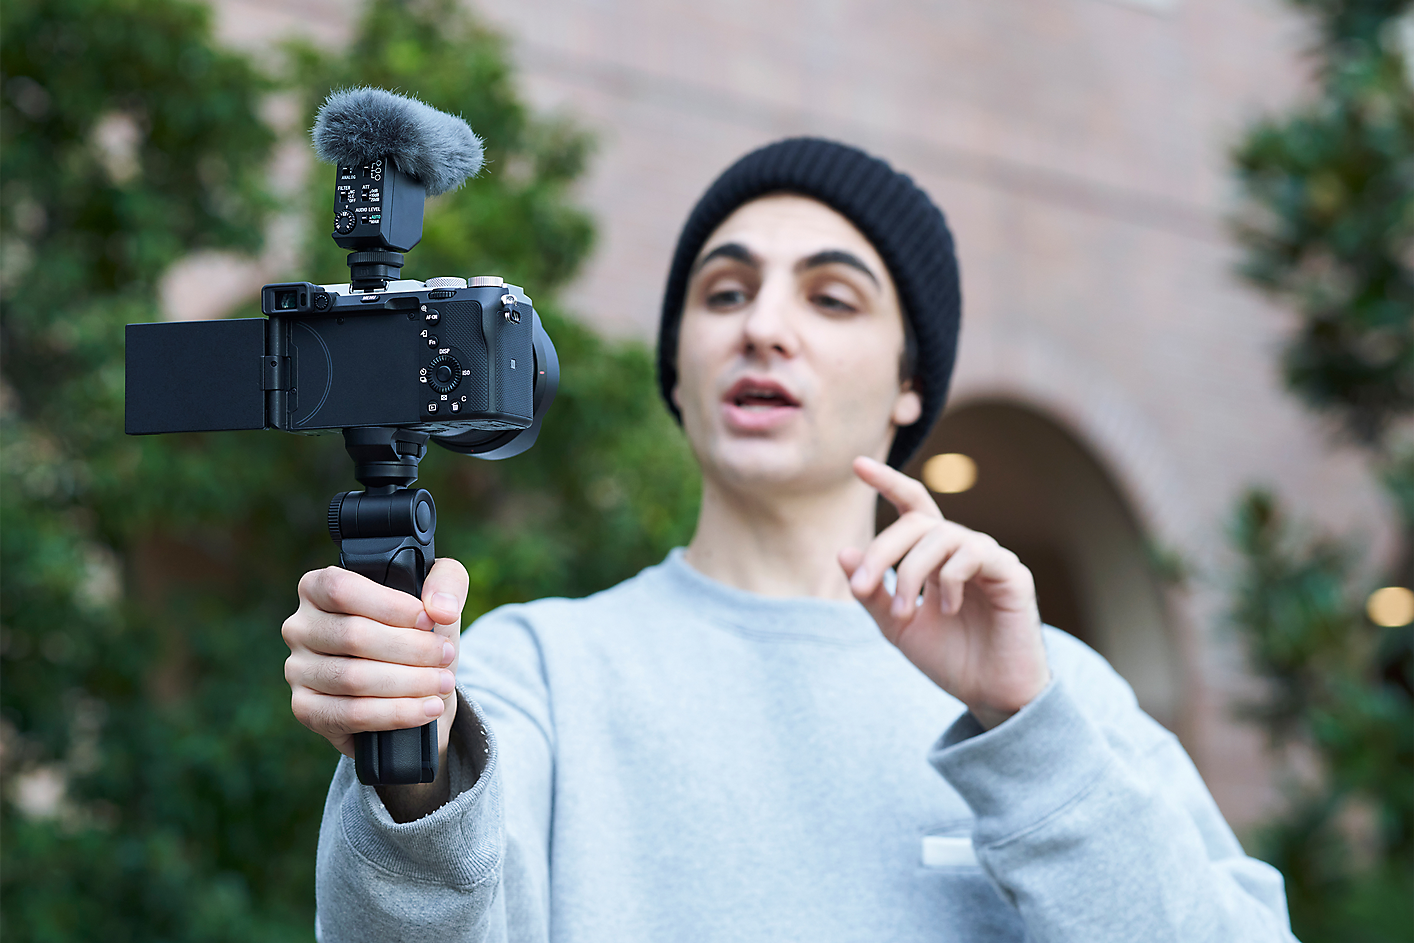 Image of a person taking a selfie in super-directional mode with the ECM-B10 attached to the camera.